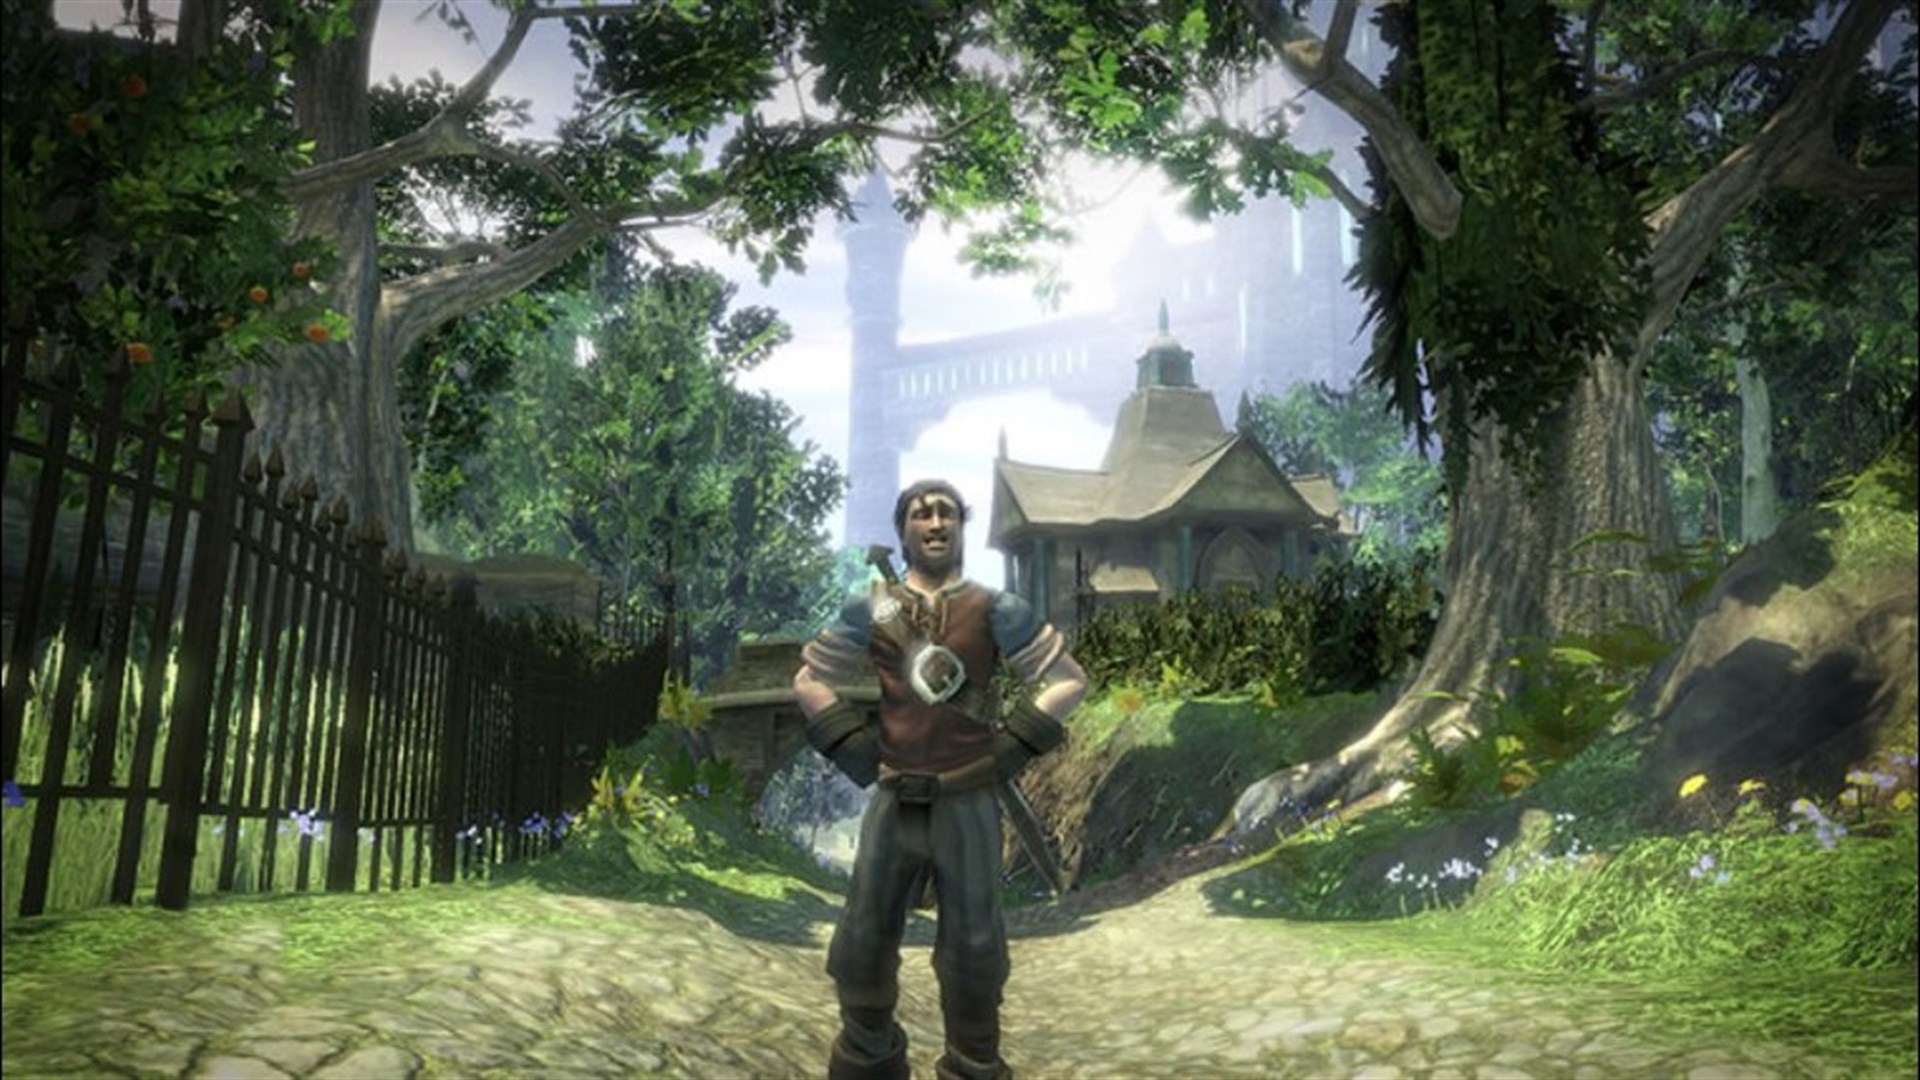 fable 2 xbox store